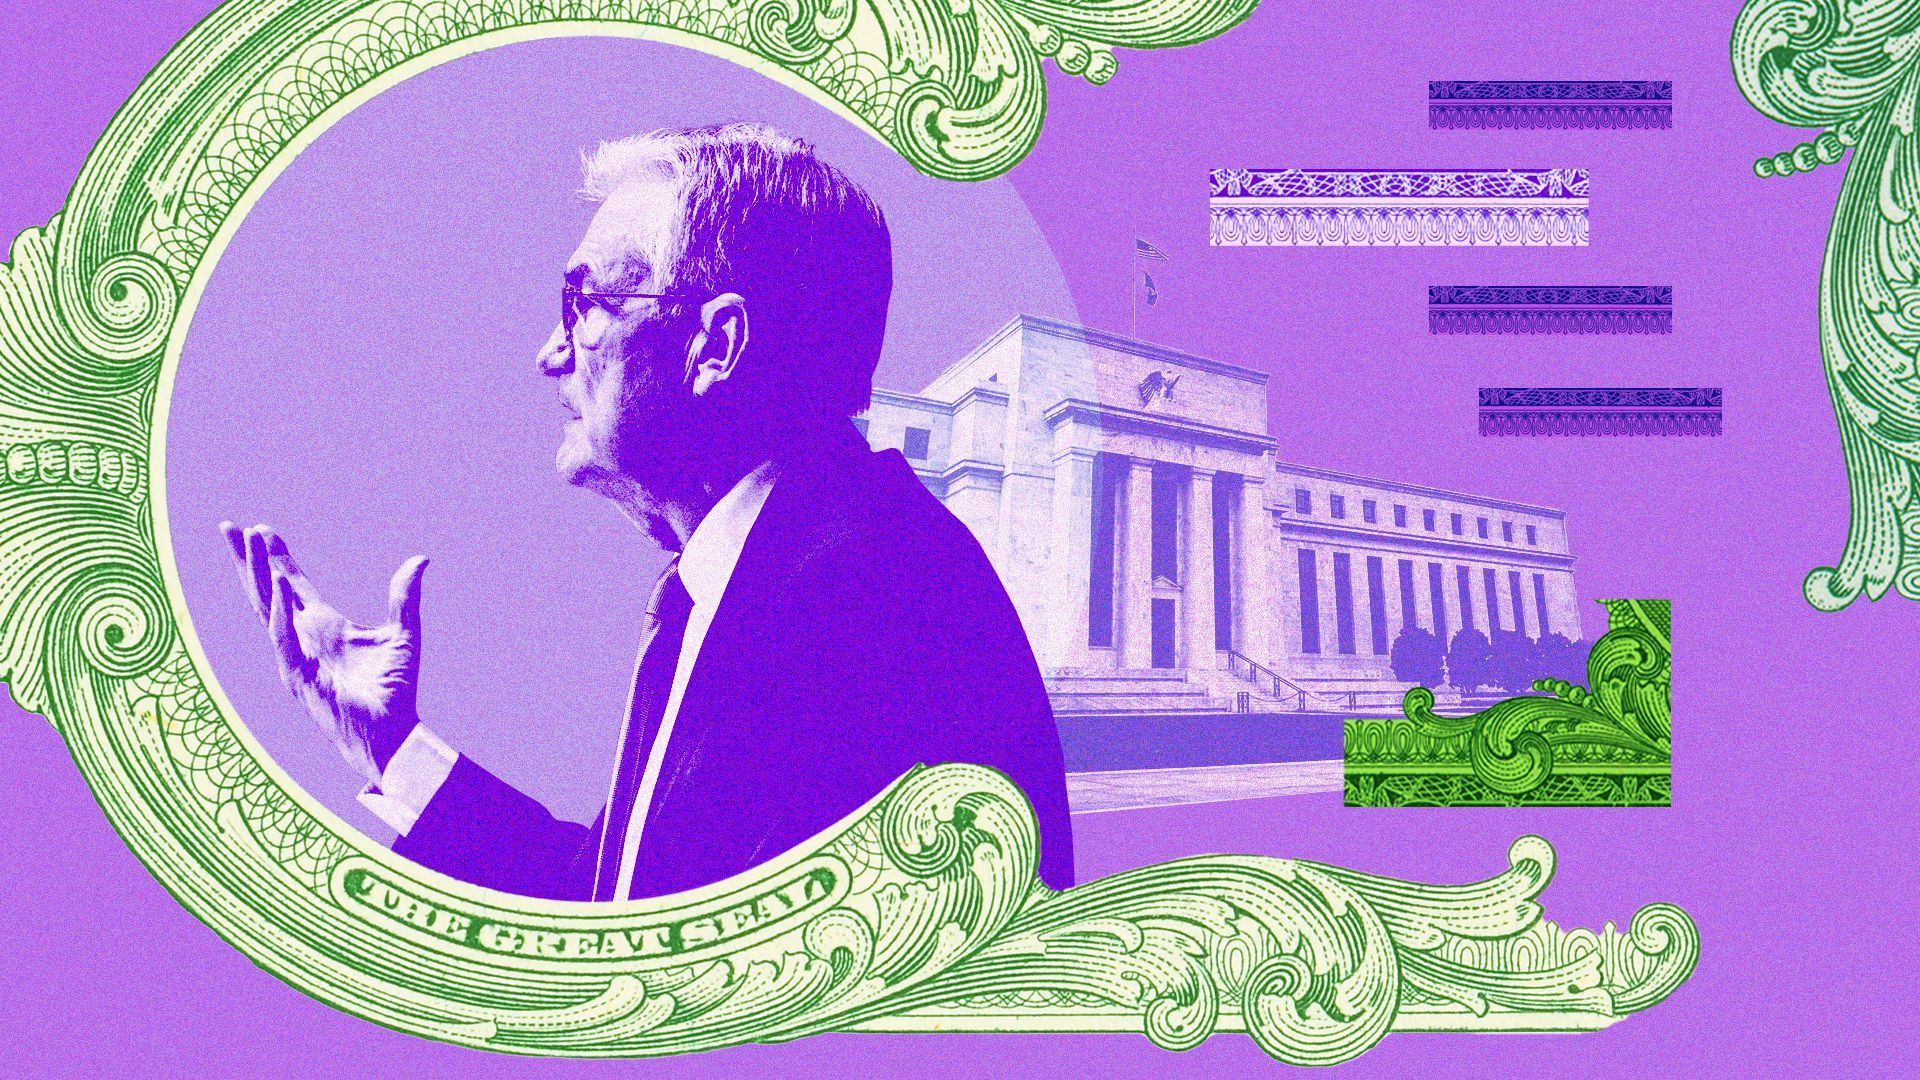 Illustration of Jerome Powell and the Federal Reserve building collaged with money elements.